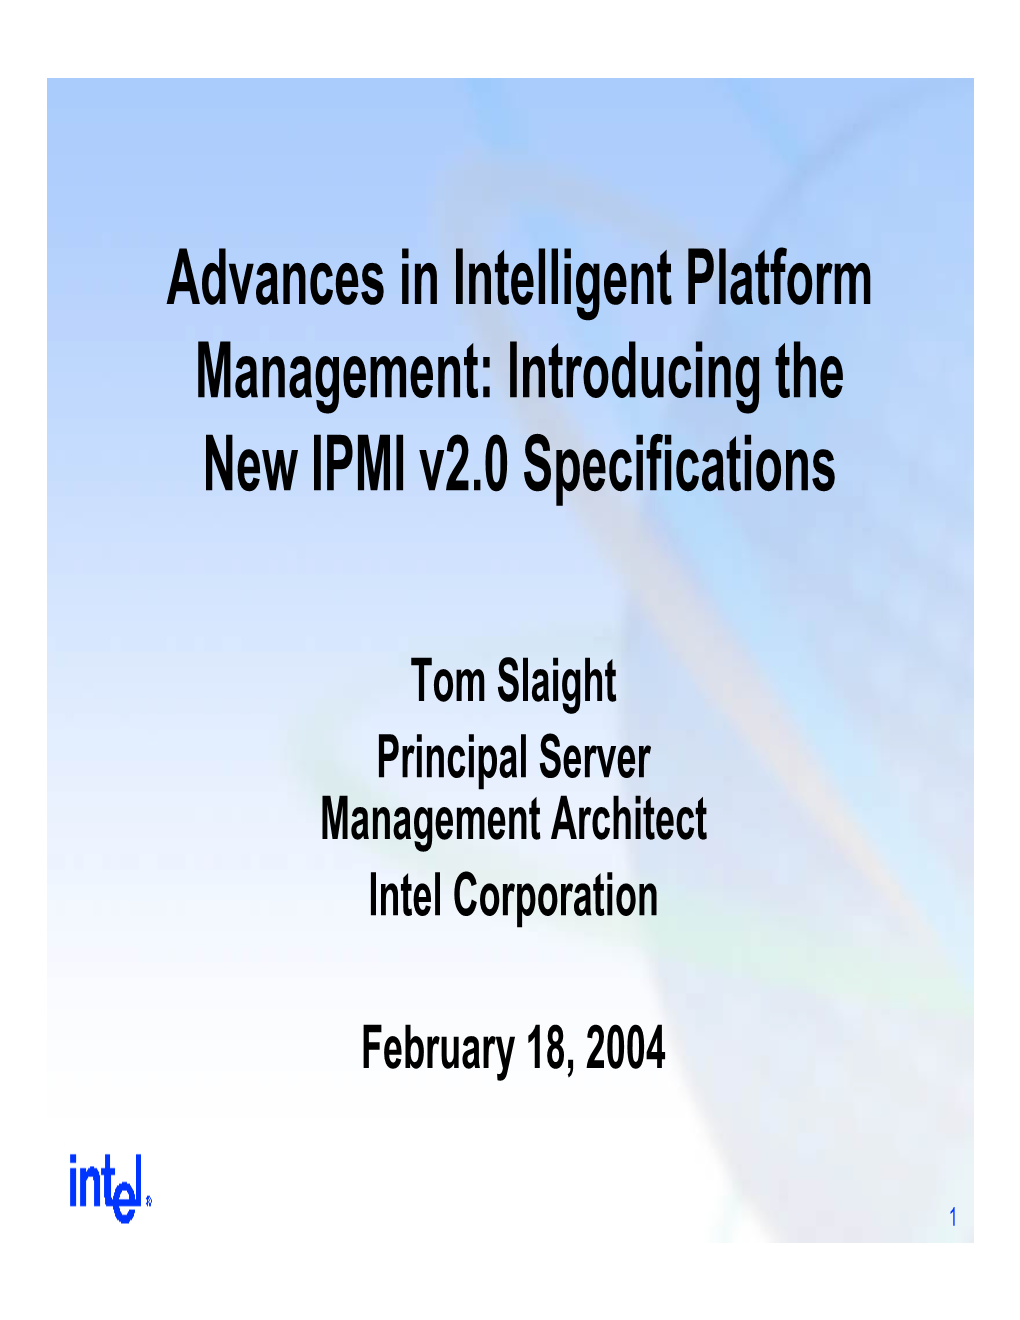 Introducing the New IPMI V2.0 Specifications